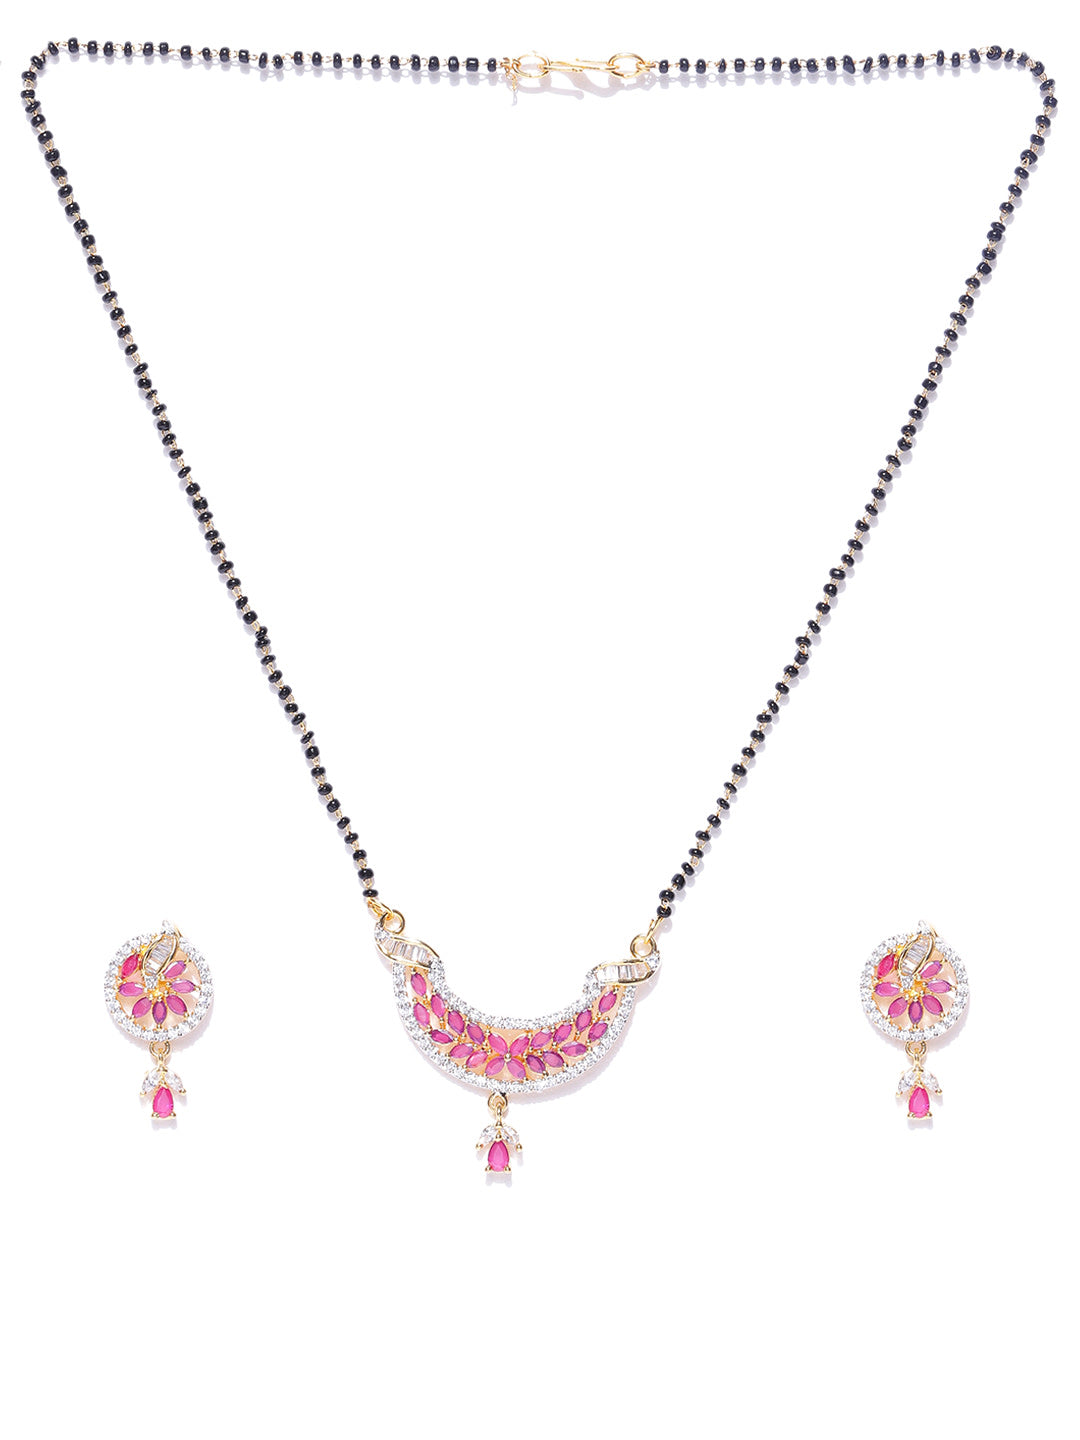 Graceful Leaf Shaped Pink And White American Diamond Mangalsutra Set For Women